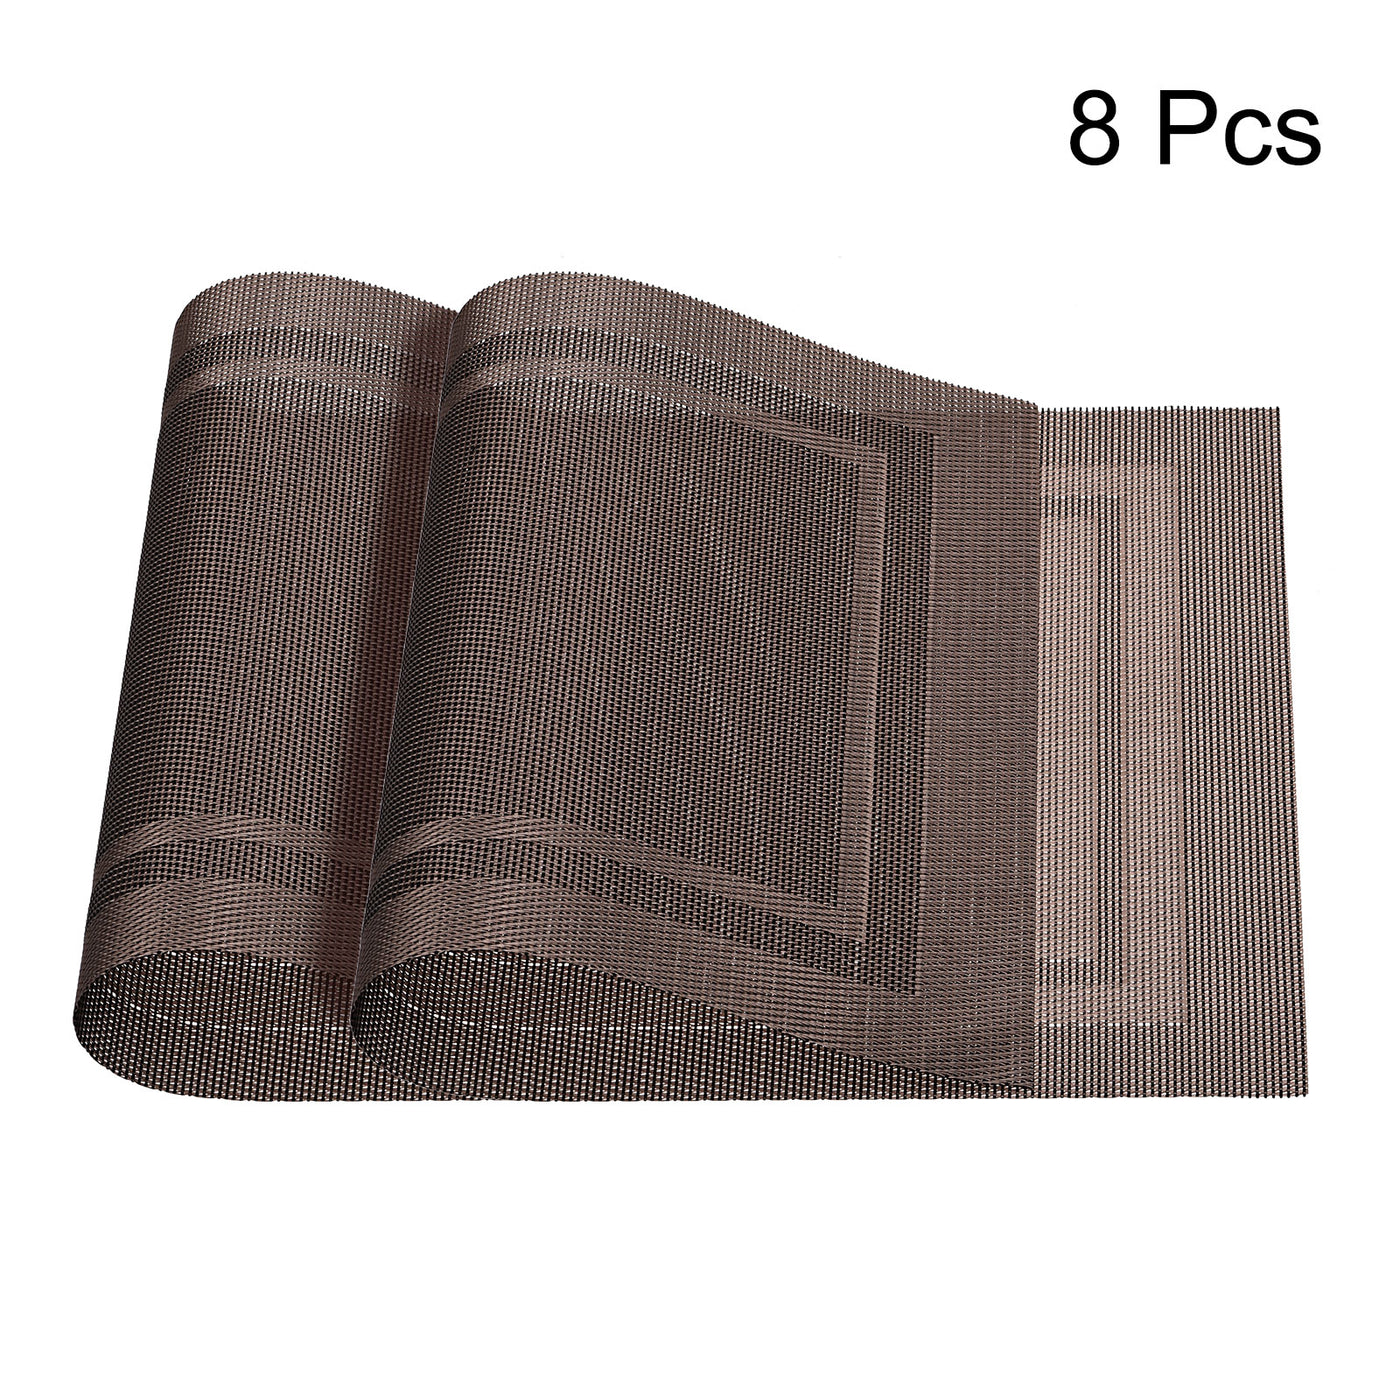 uxcell Uxcell Place Mats, 450x300mm Table Mats Set of 8 PVC Washable Woven Placemat Coffee